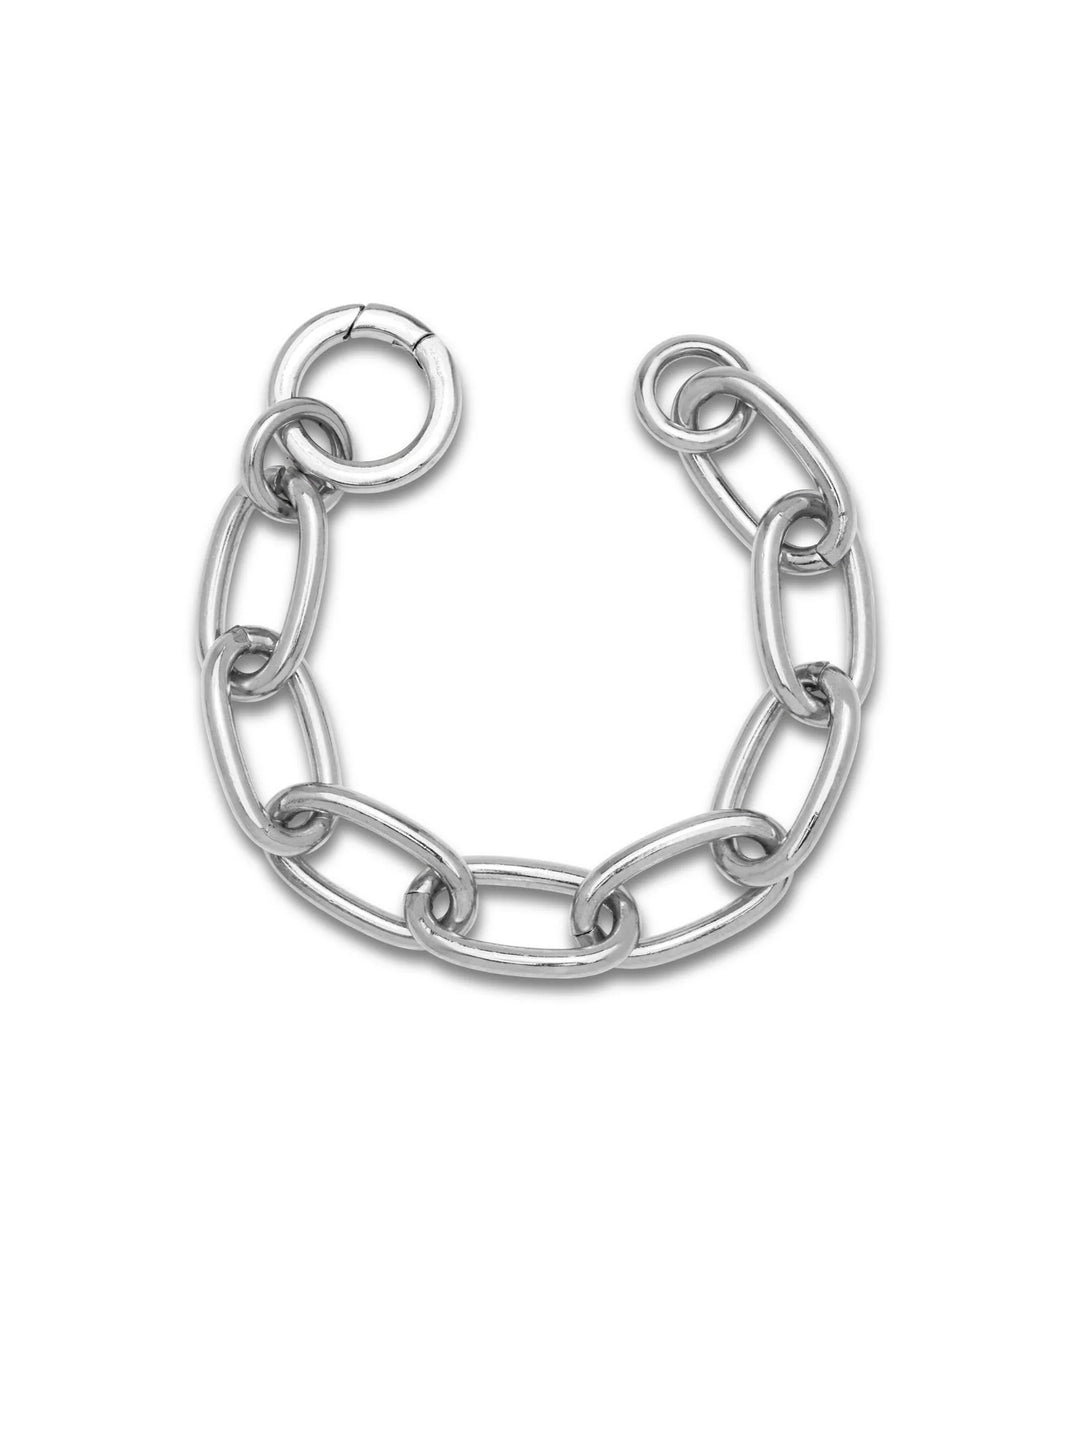 EVERLY LINK CHAIN BRACELET- SILVER